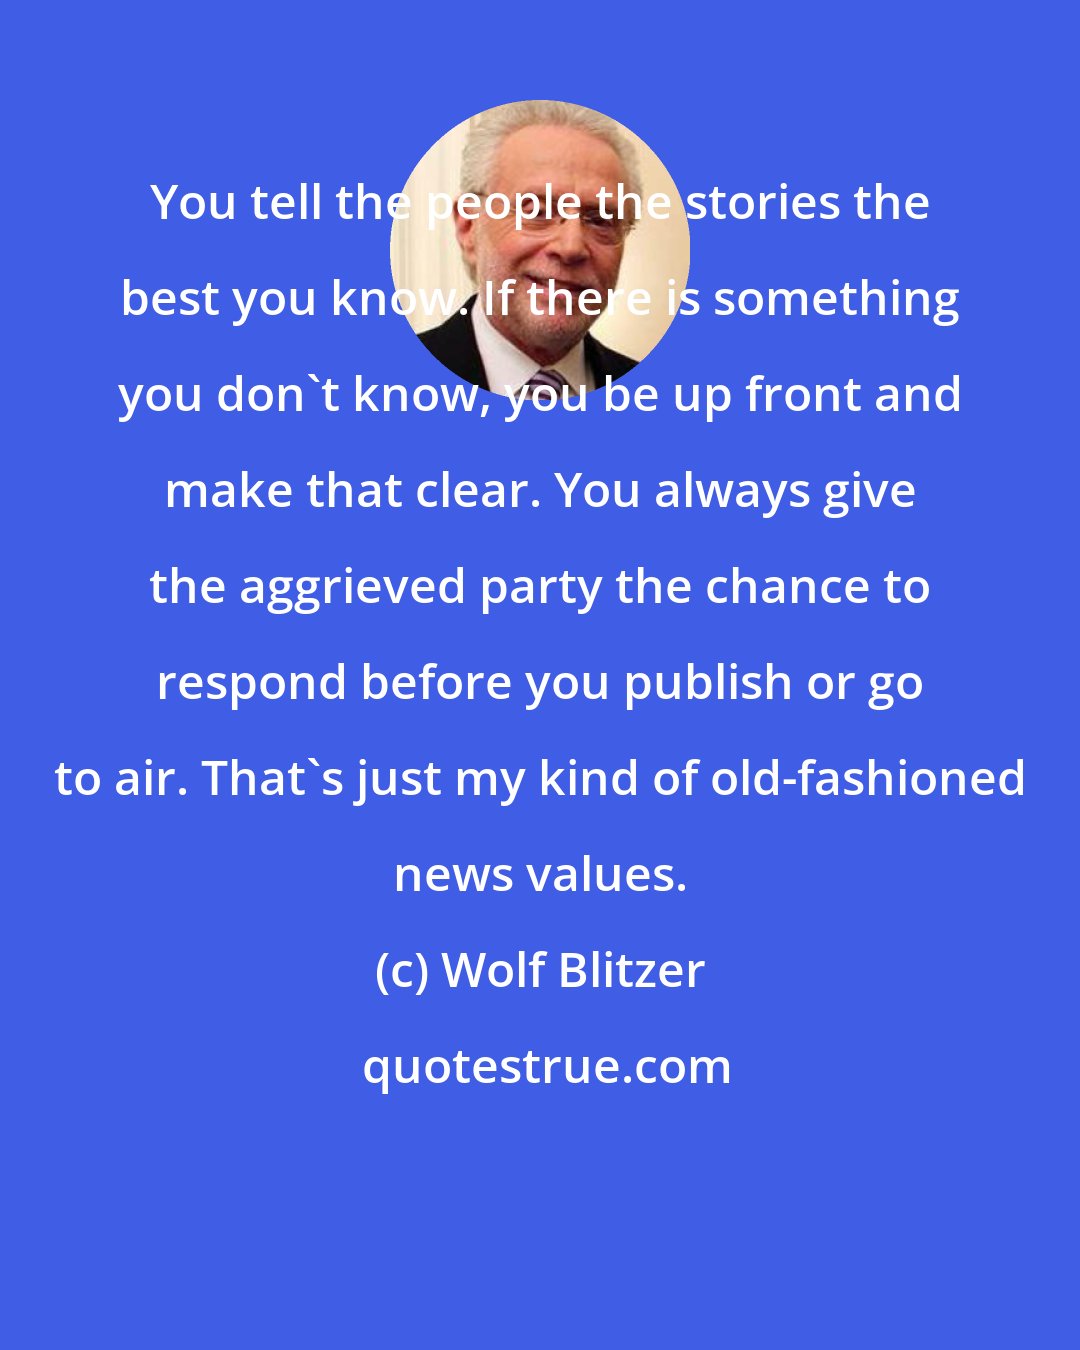 Wolf Blitzer: You tell the people the stories the best you know. If there is something you don't know, you be up front and make that clear. You always give the aggrieved party the chance to respond before you publish or go to air. That's just my kind of old-fashioned news values.